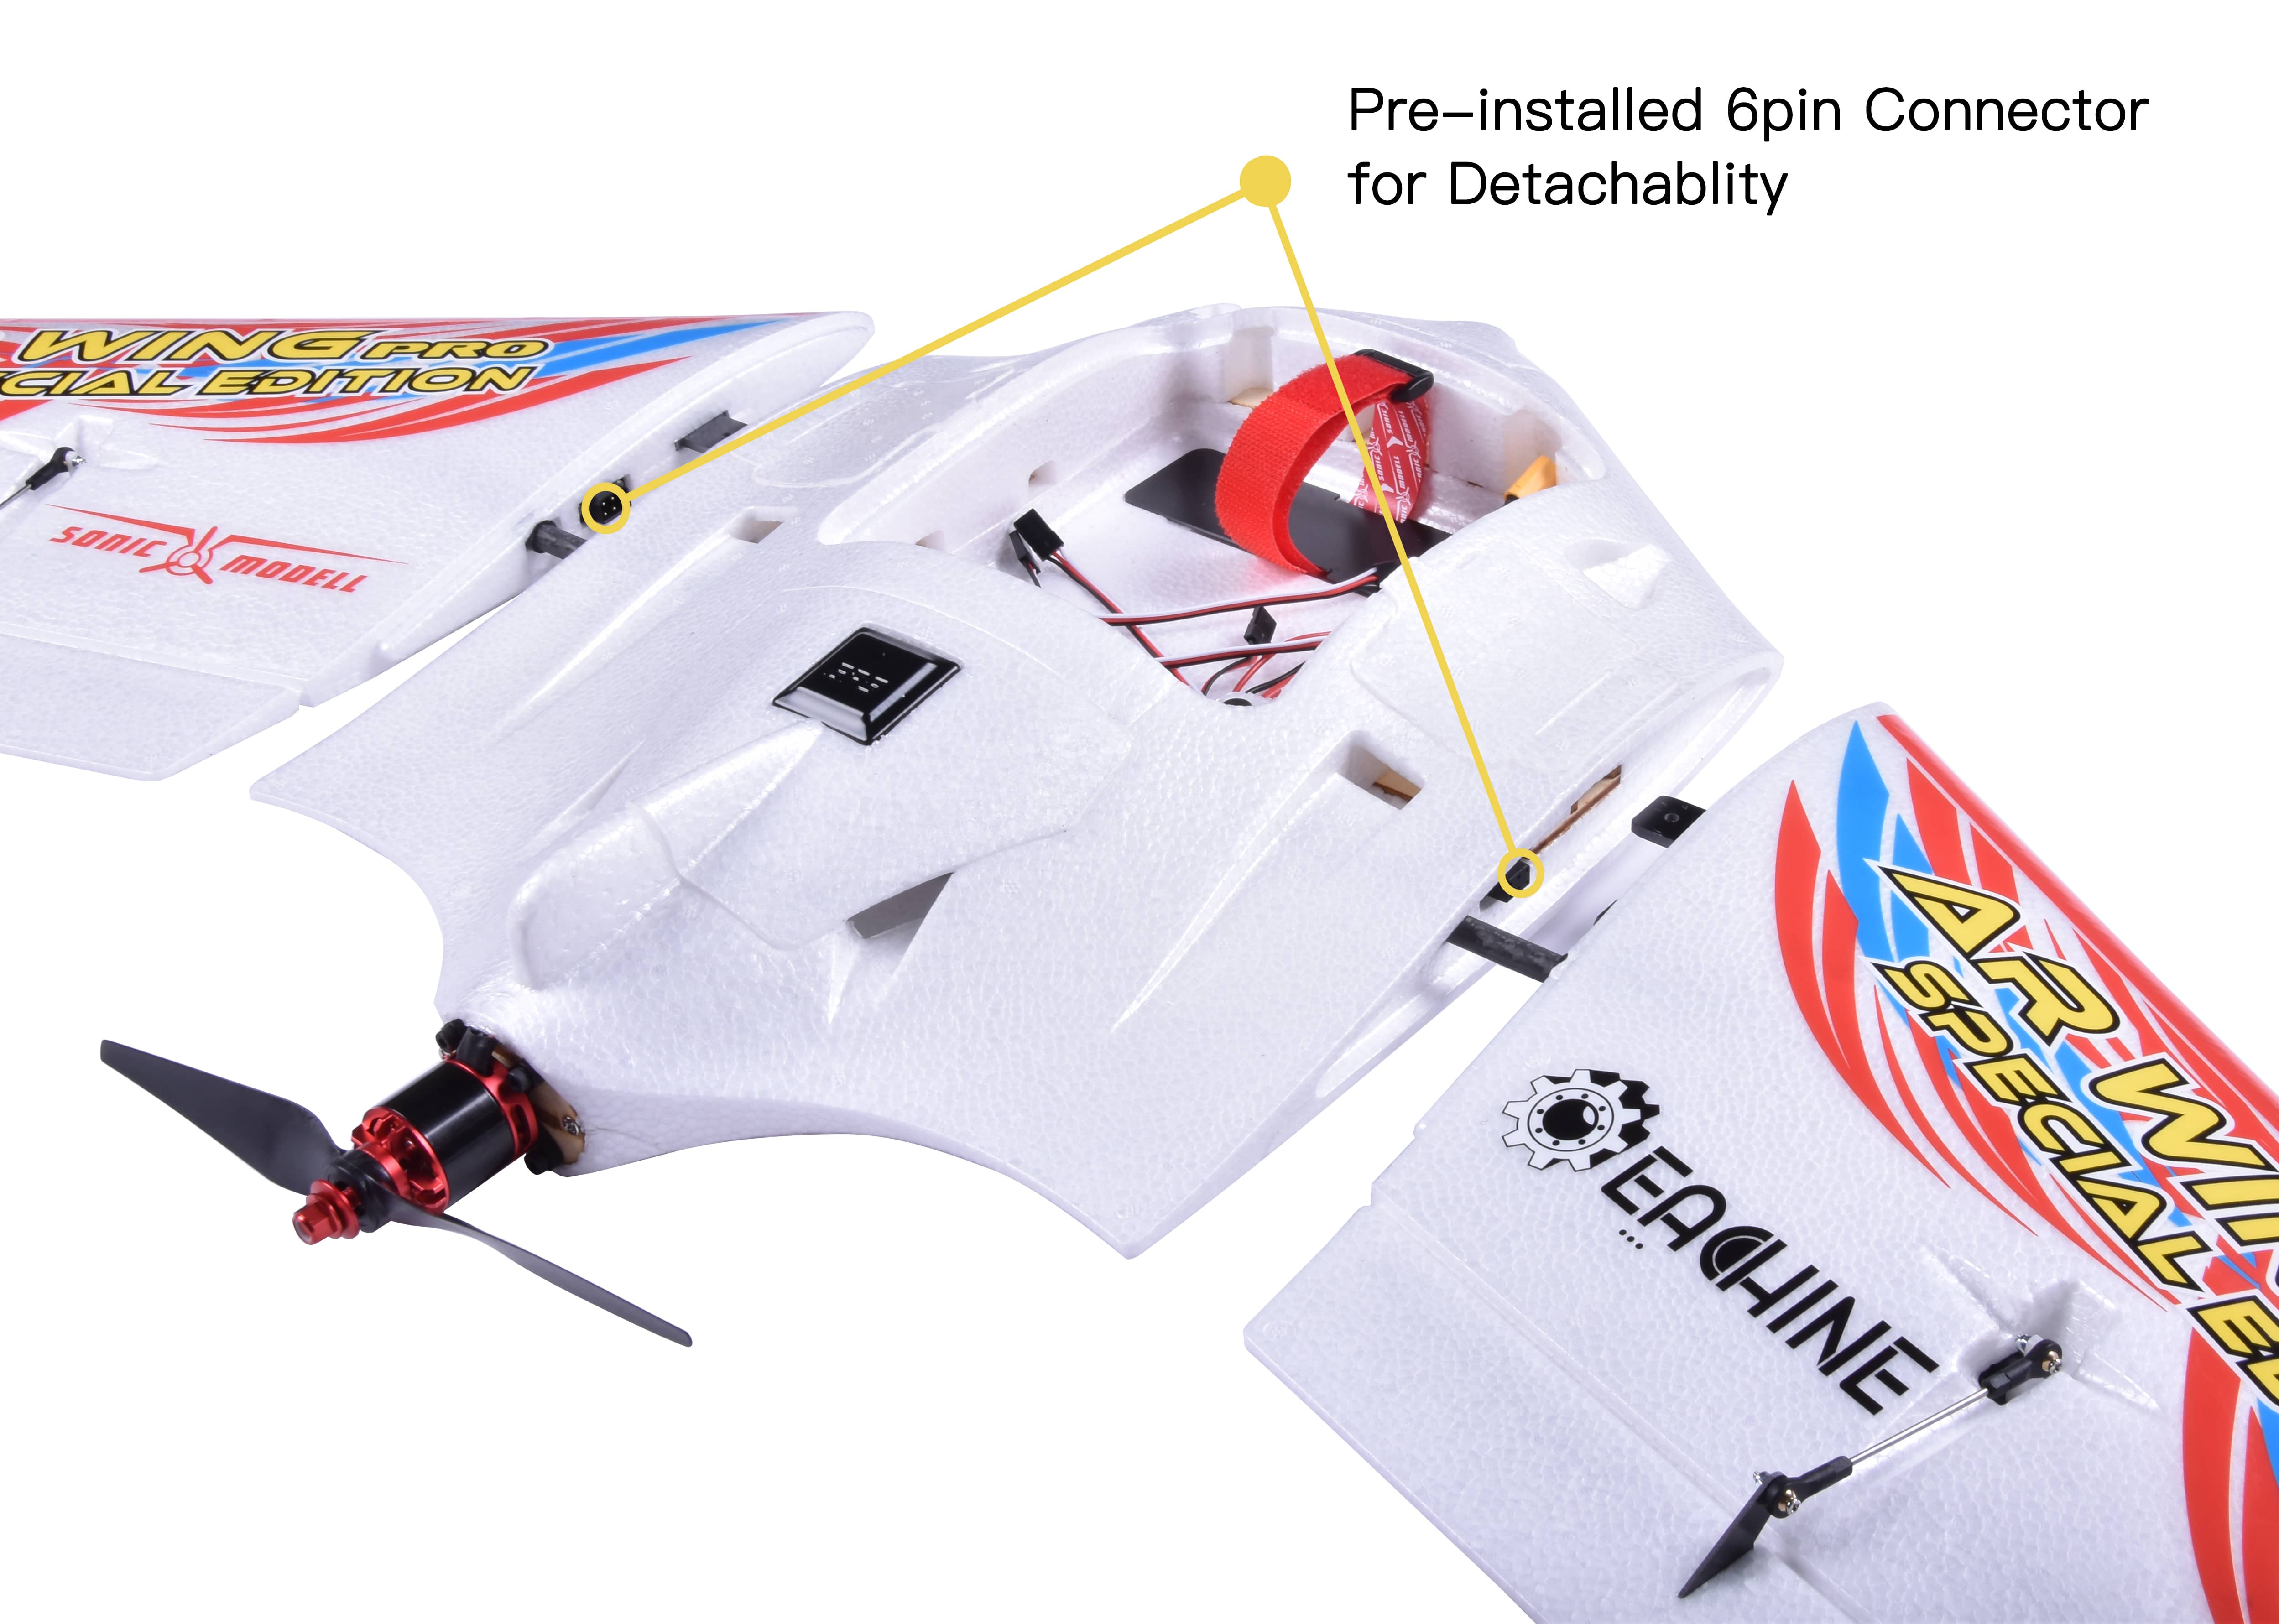 Eachine--Sonicmodell-AR-Wing-Pro-Special-Edition-1000mm-Wingspan-EPP-FPV-Flying-Wing-RC-Airplane-KIT-1857256-6